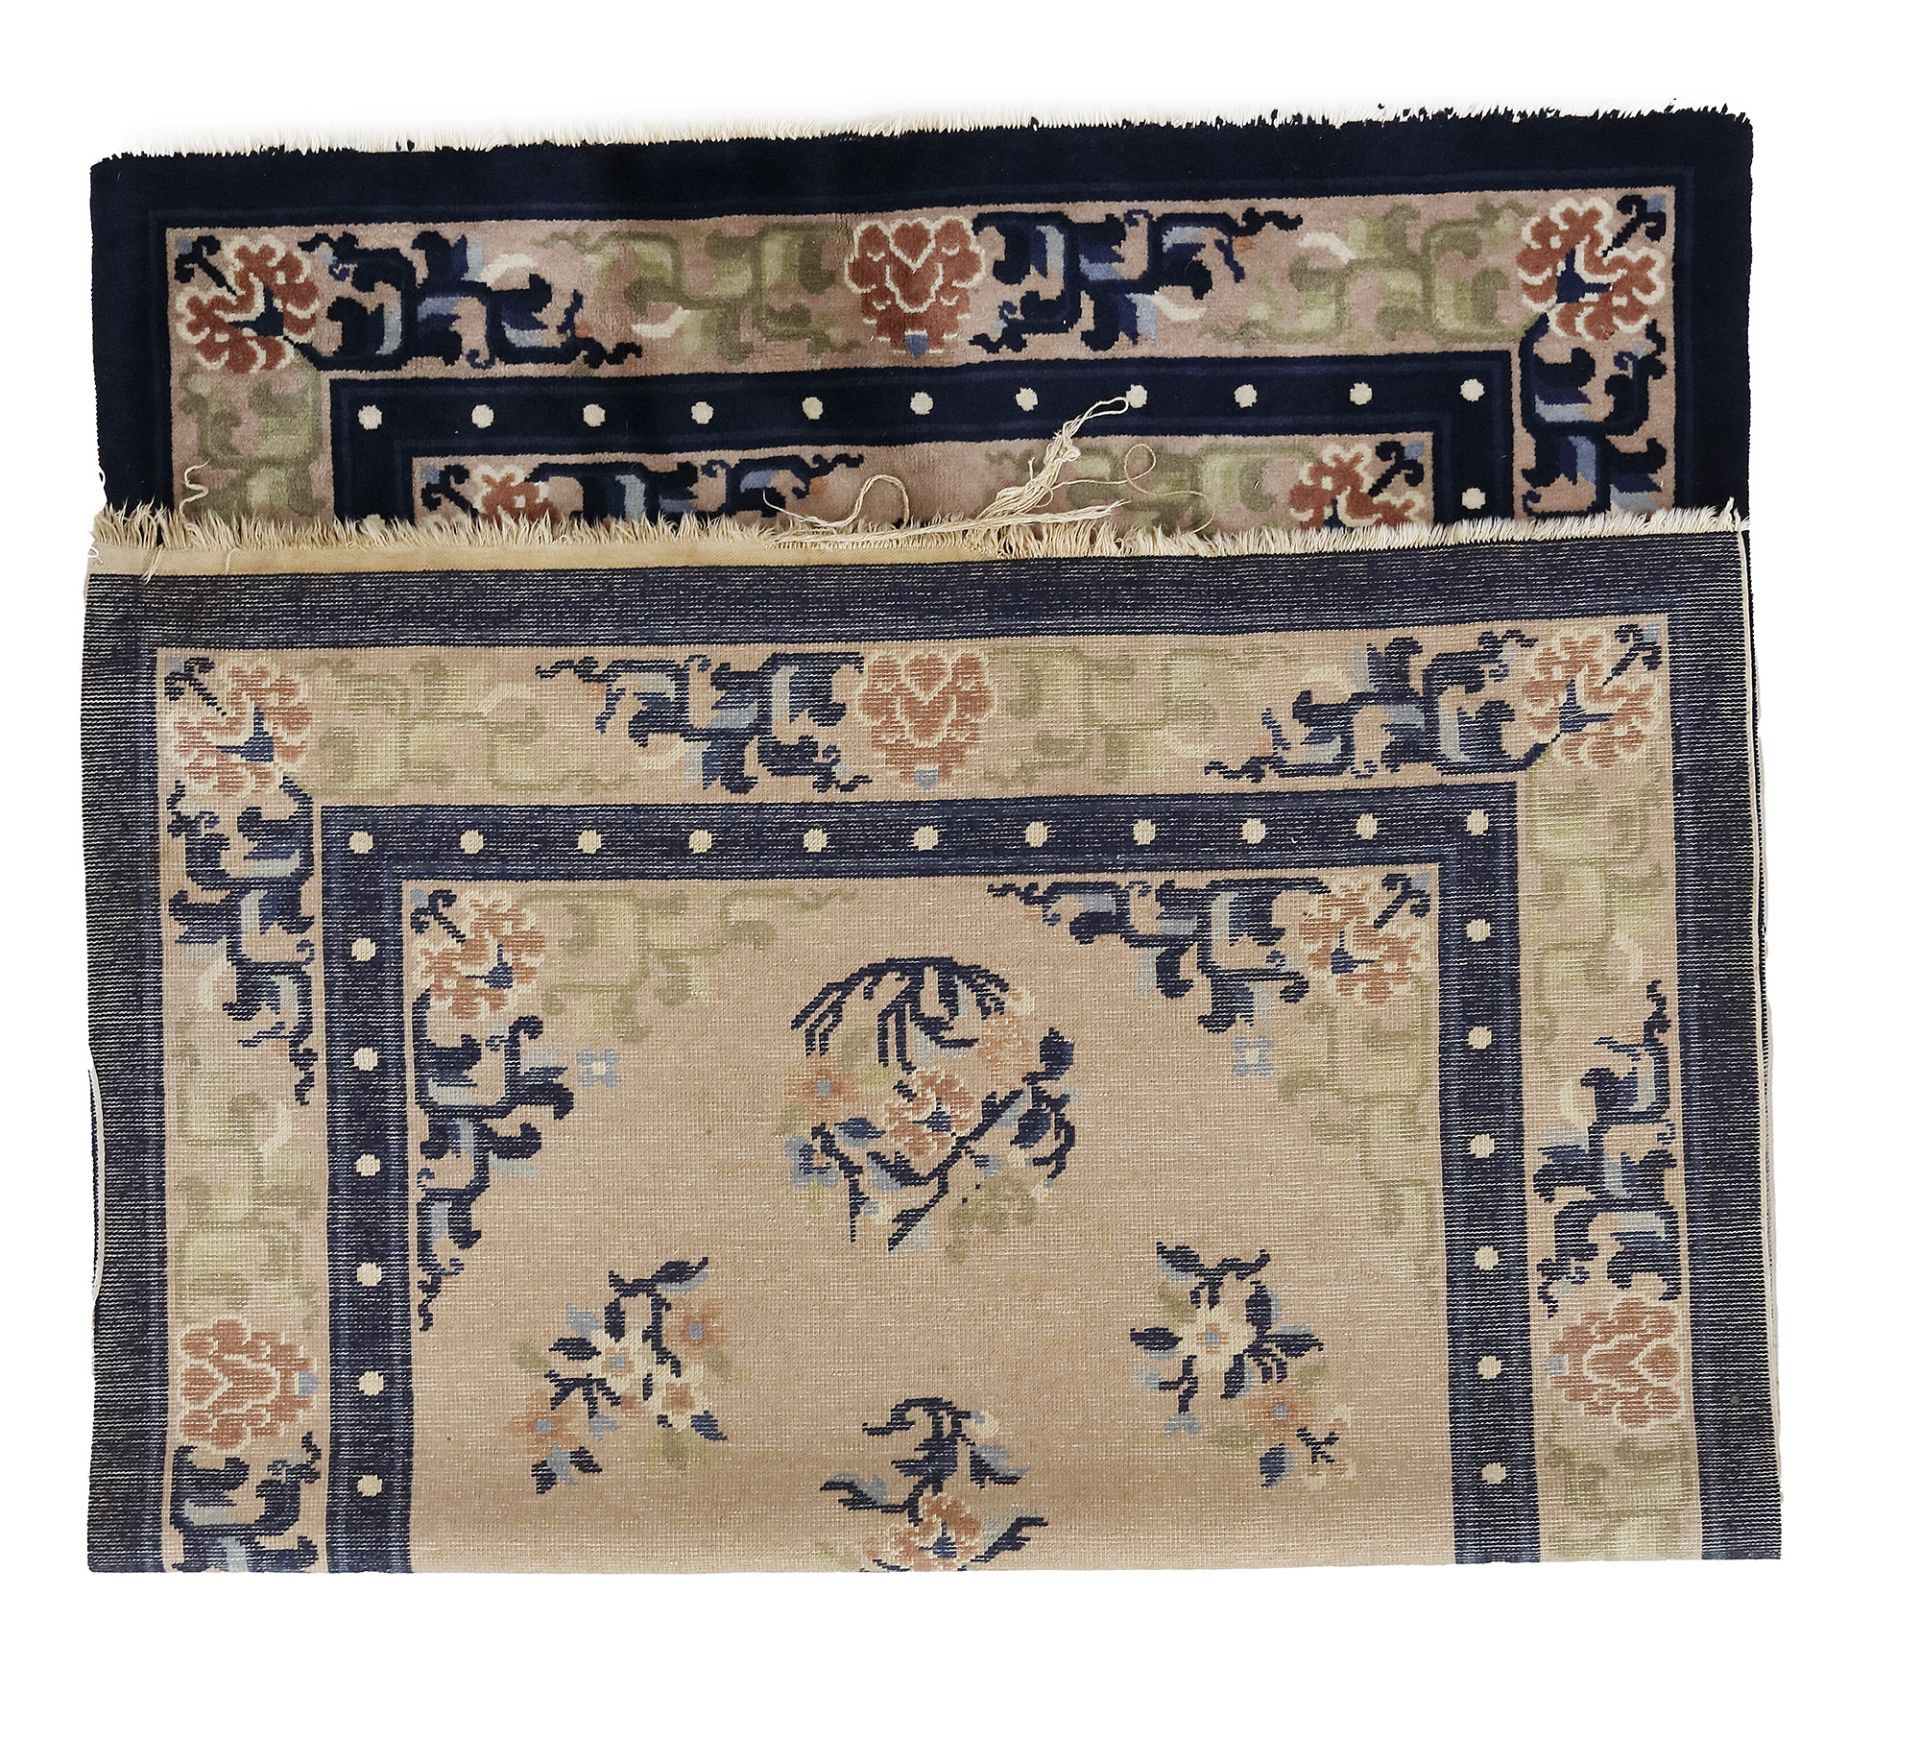 A CHINESE PEKING CARPET, EARLY 20TH CENTURY - Image 2 of 2